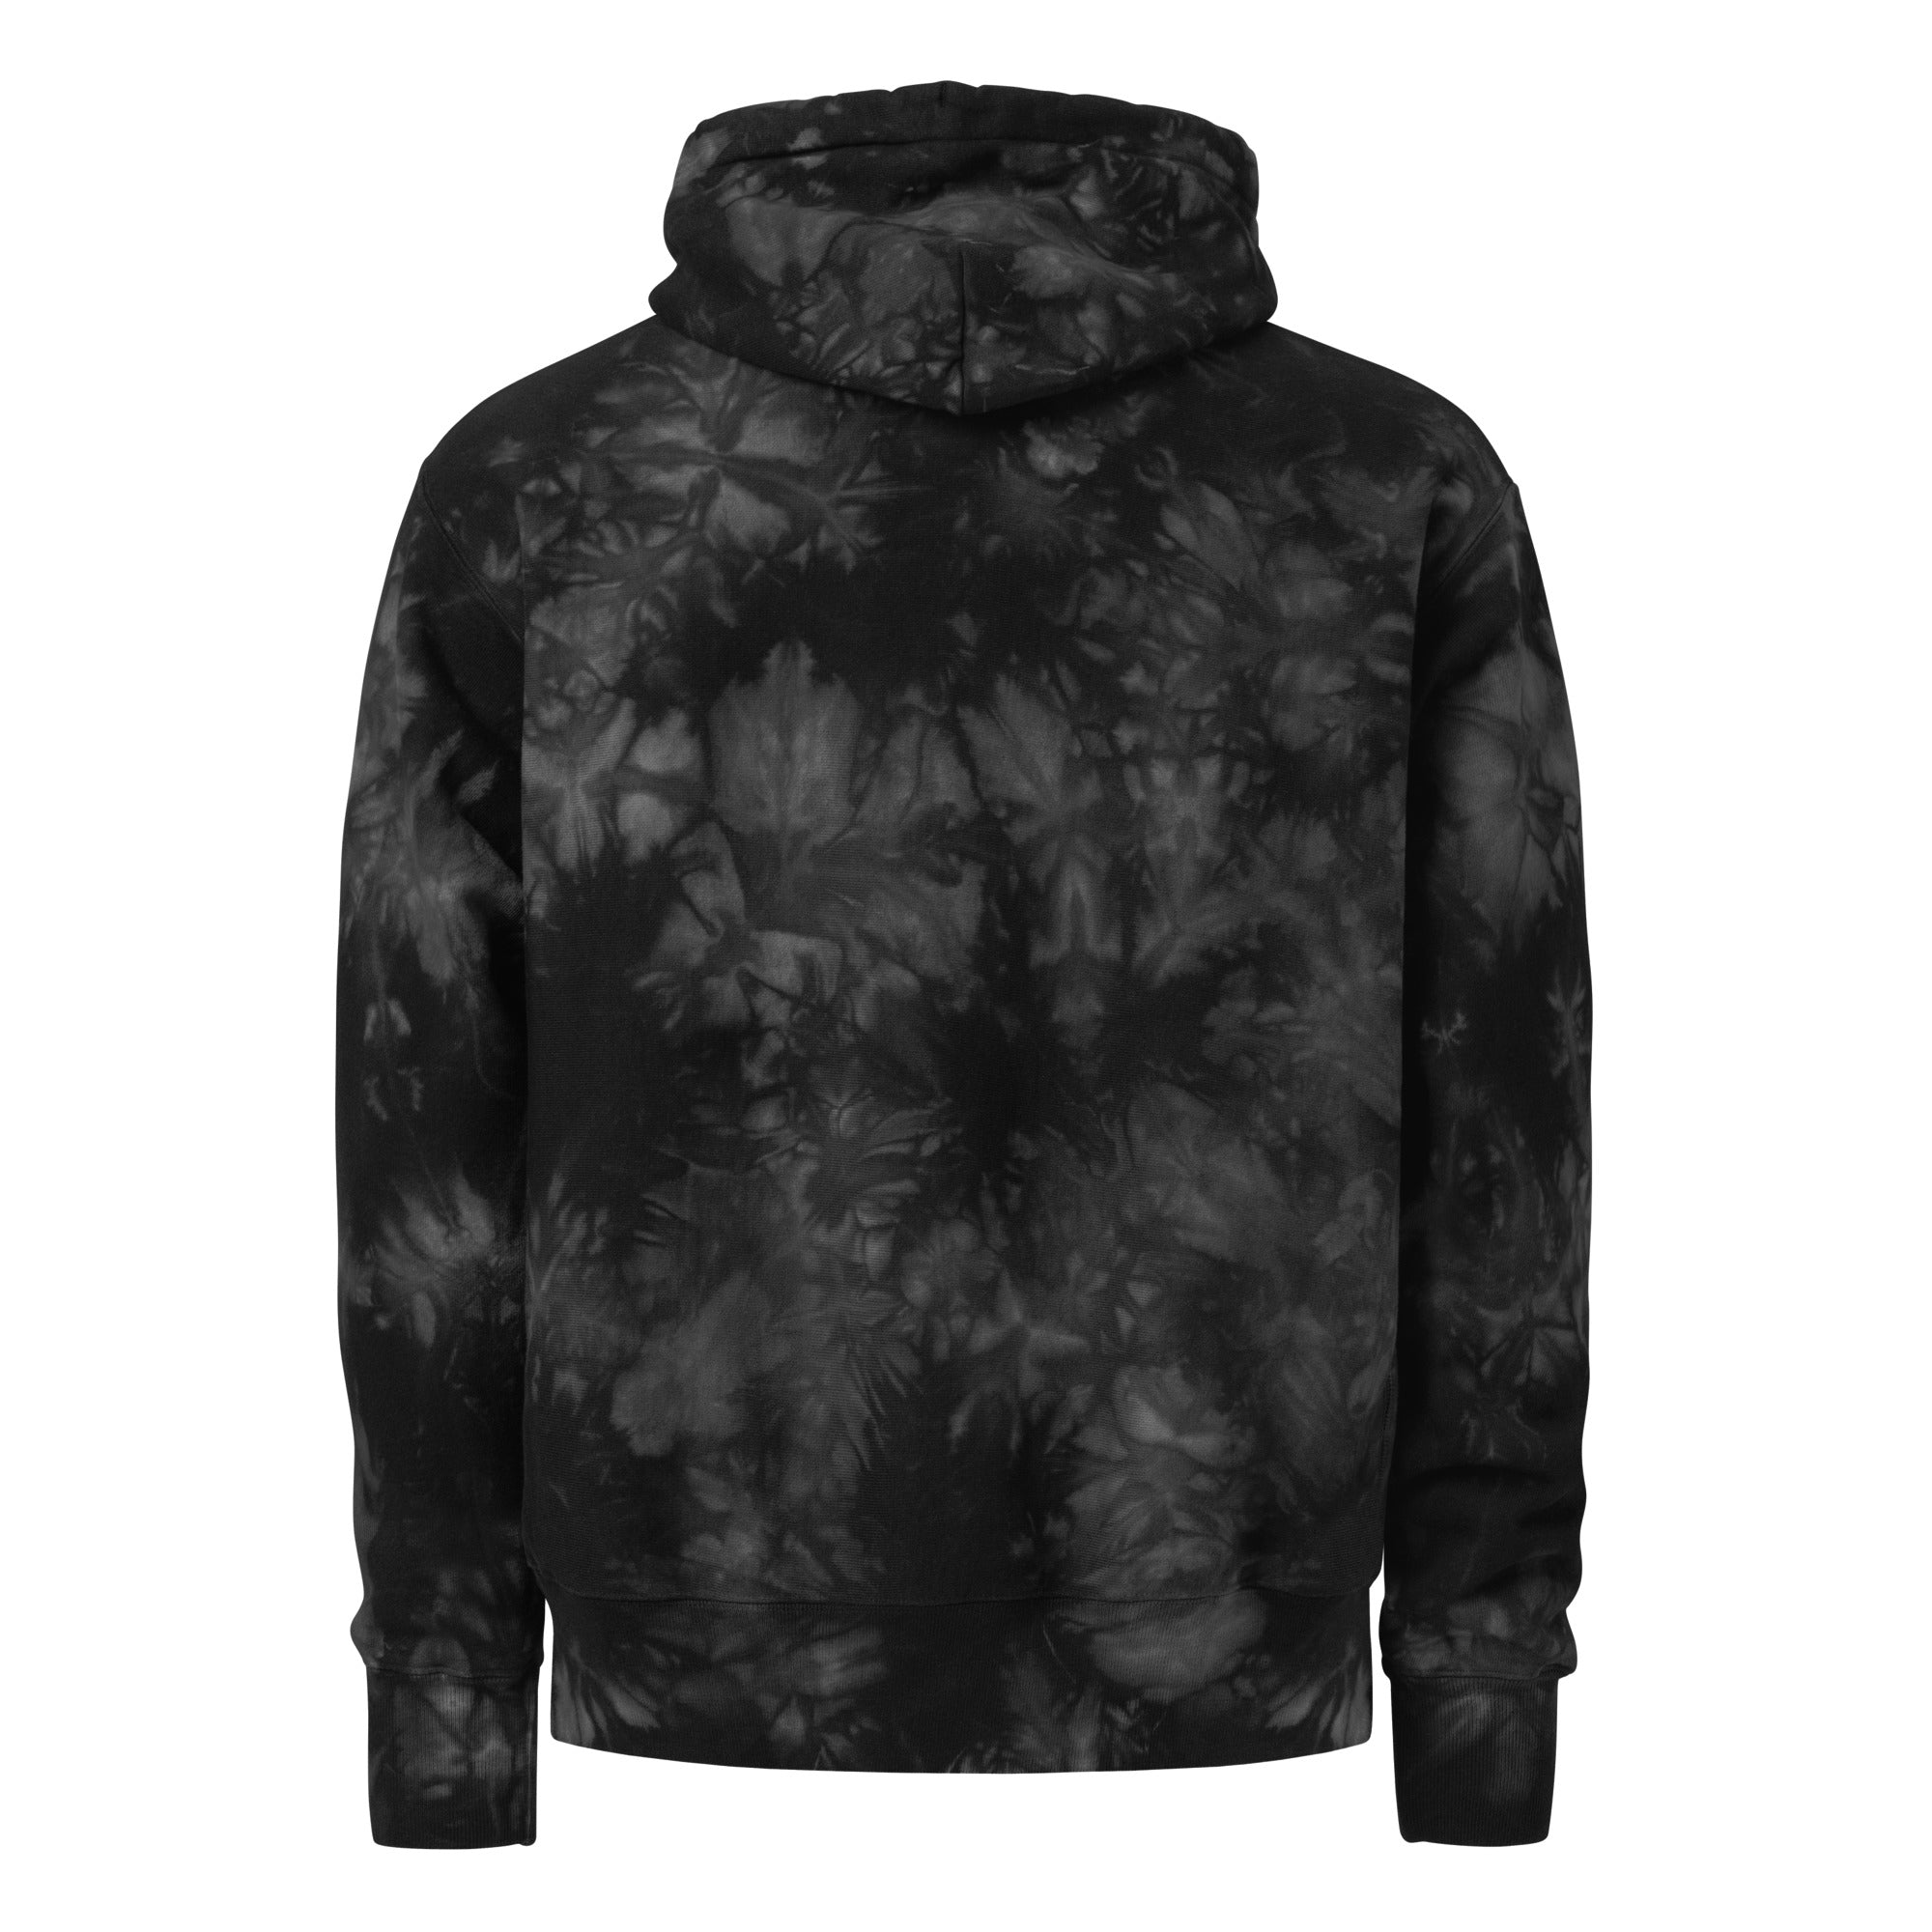 Unchained Potential Unisex Champion tie-dye hoodie v2